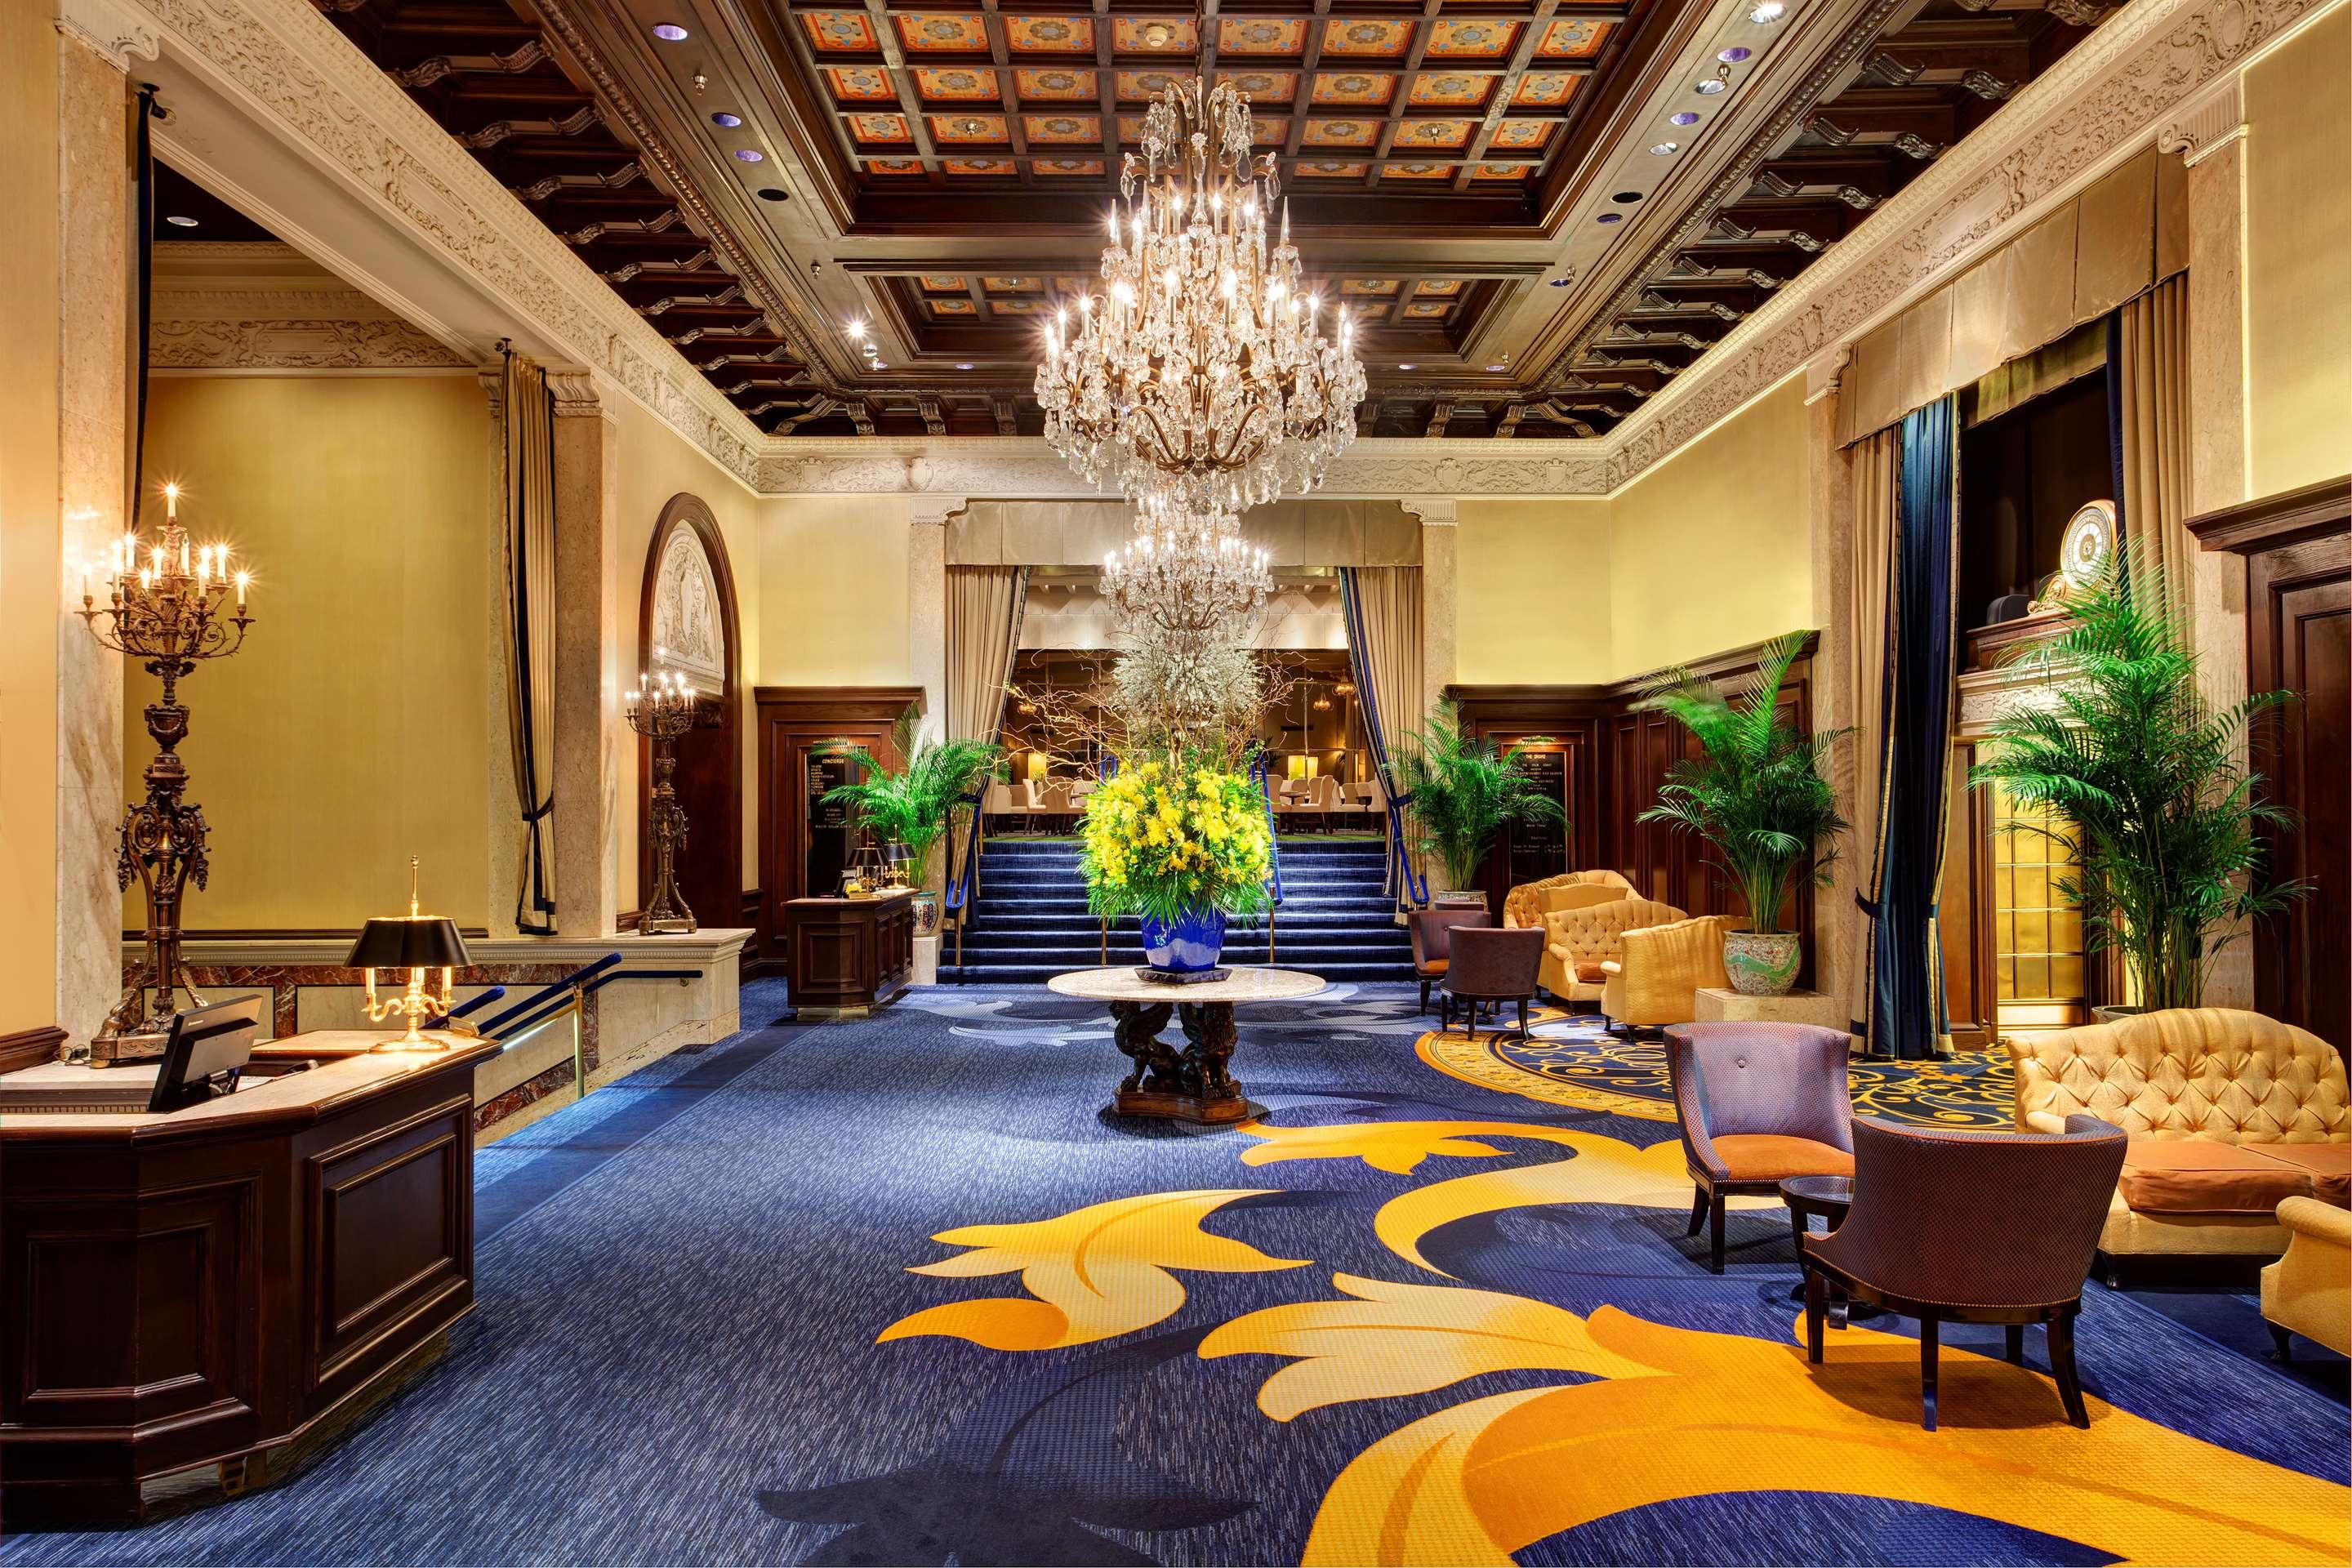 Lobby view of The Drake